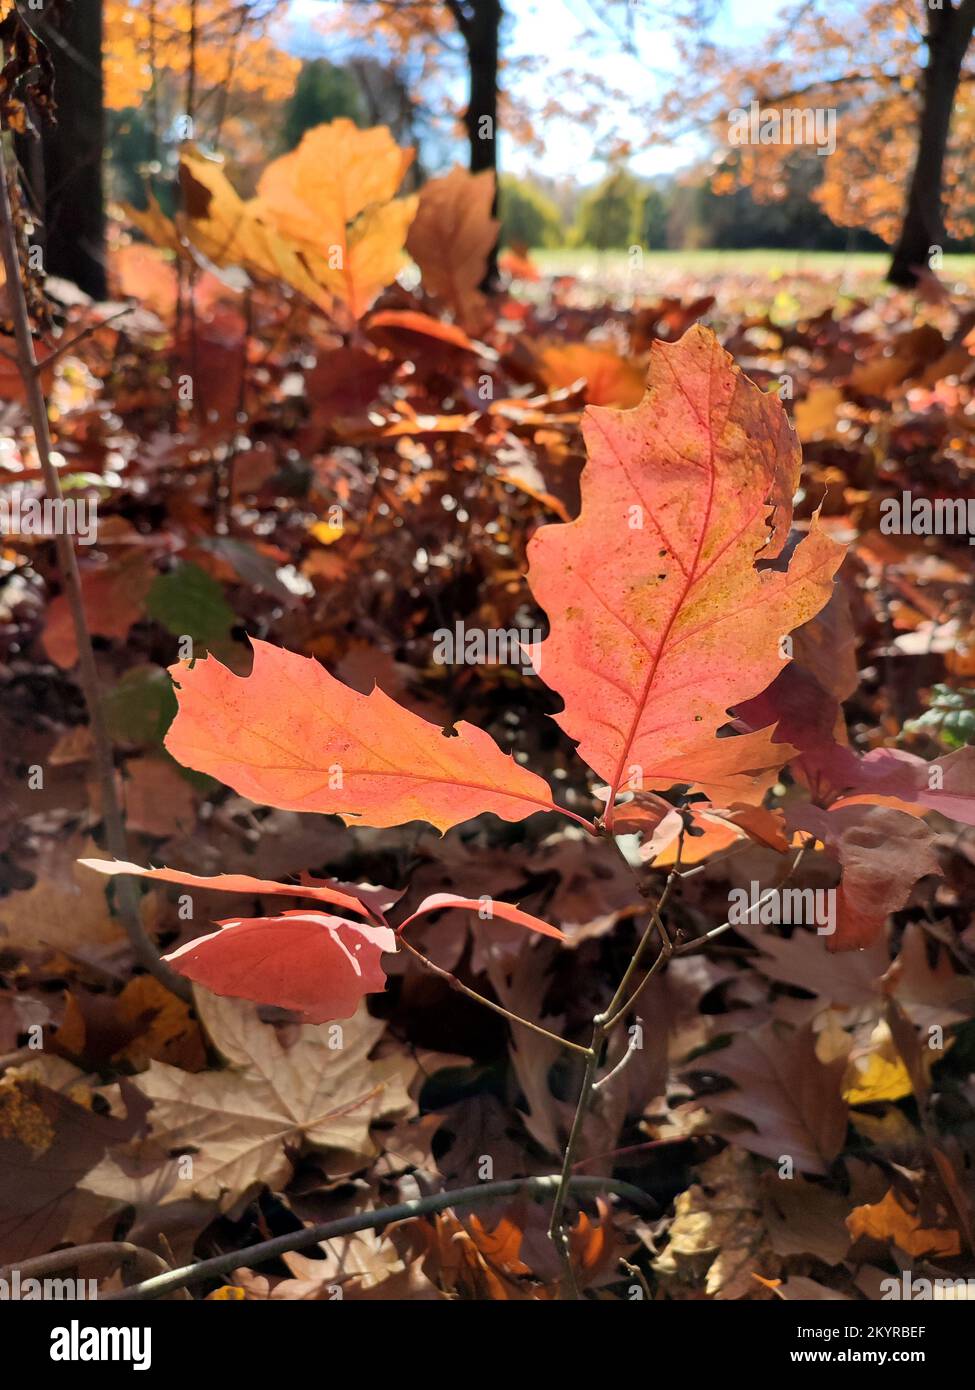 Red oak leaves against the background of young oak with brown leaves sprouts on a sunny autumn day in the forest. Woodland autumn seasonal backdrop. Natural environment background Stock Photo